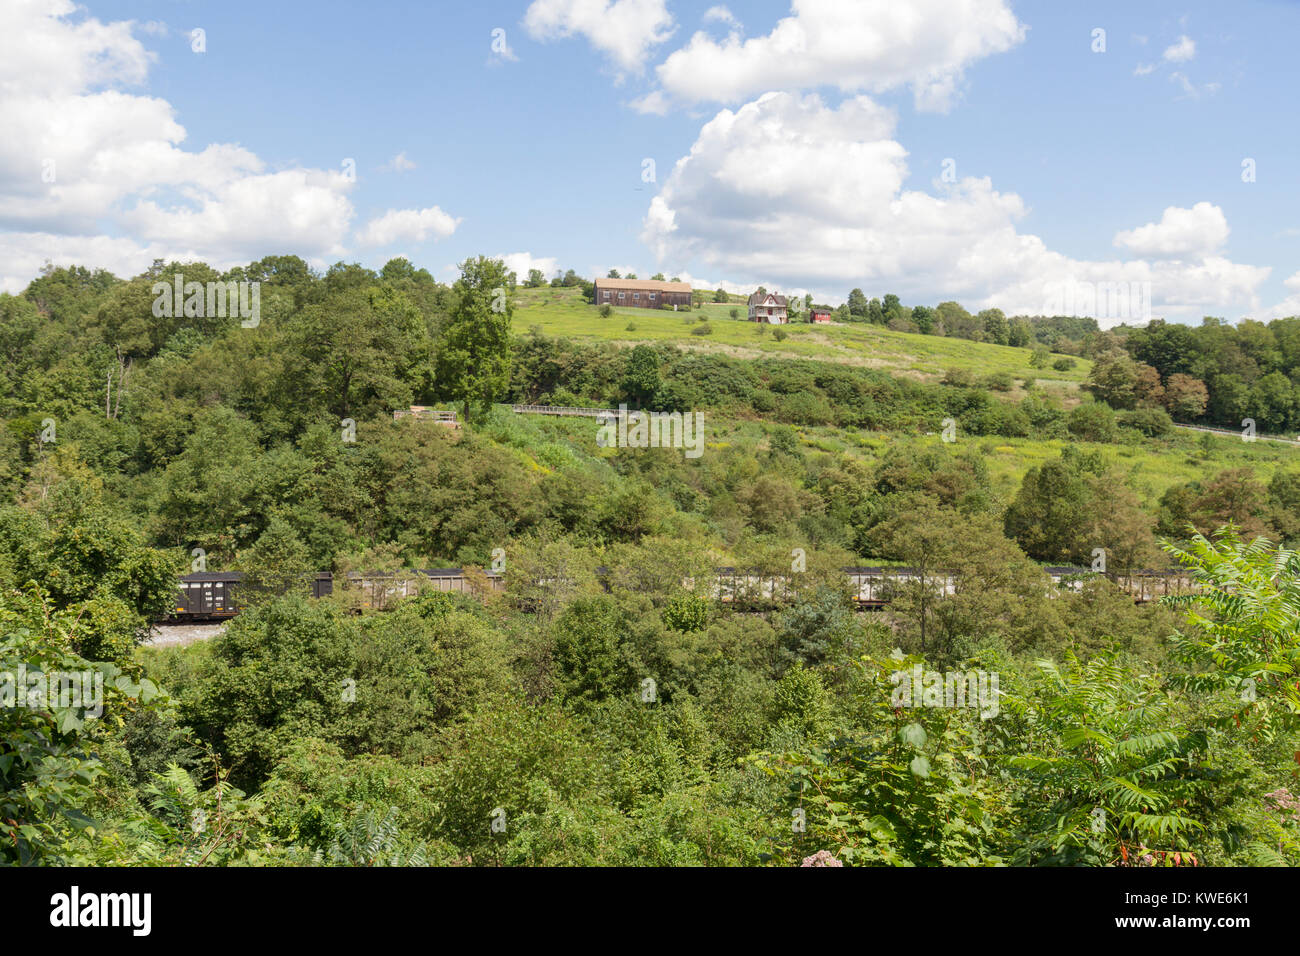 The Johnstown Flood National Memorial site, Pennsylvania, United States.  View looking NW across the section that collapsed. Stock Photo